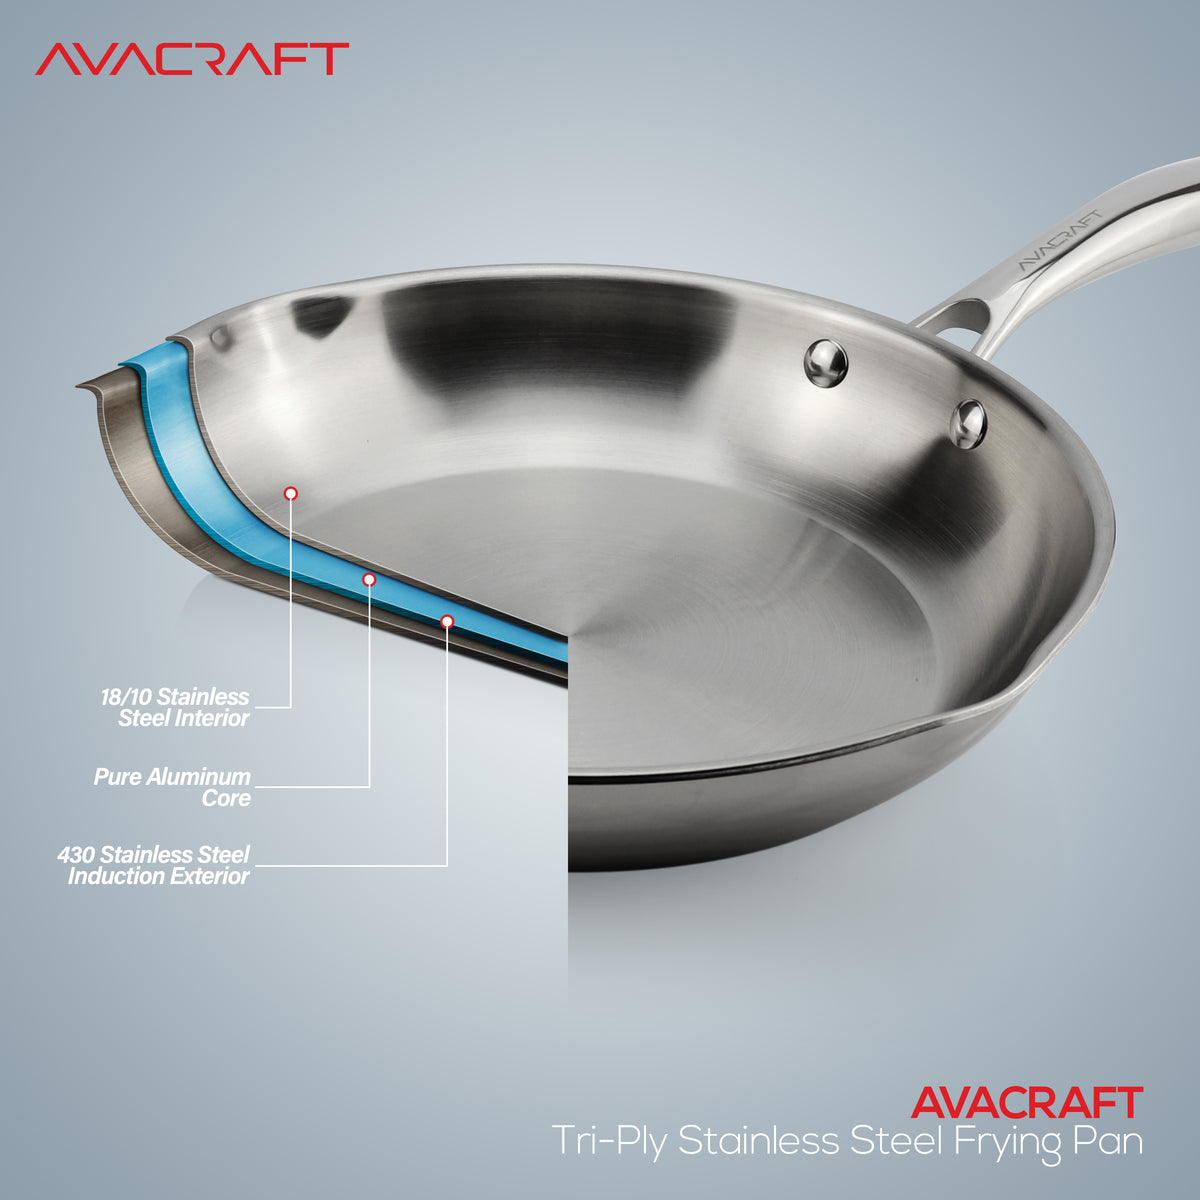 AVACRAFT 18/10 Stainless Steel Cookware Set, Premium Pots and Pans Set,  Kitchen Essentials for cooking, Multi-Ply Body Stainless Steel Pan Set